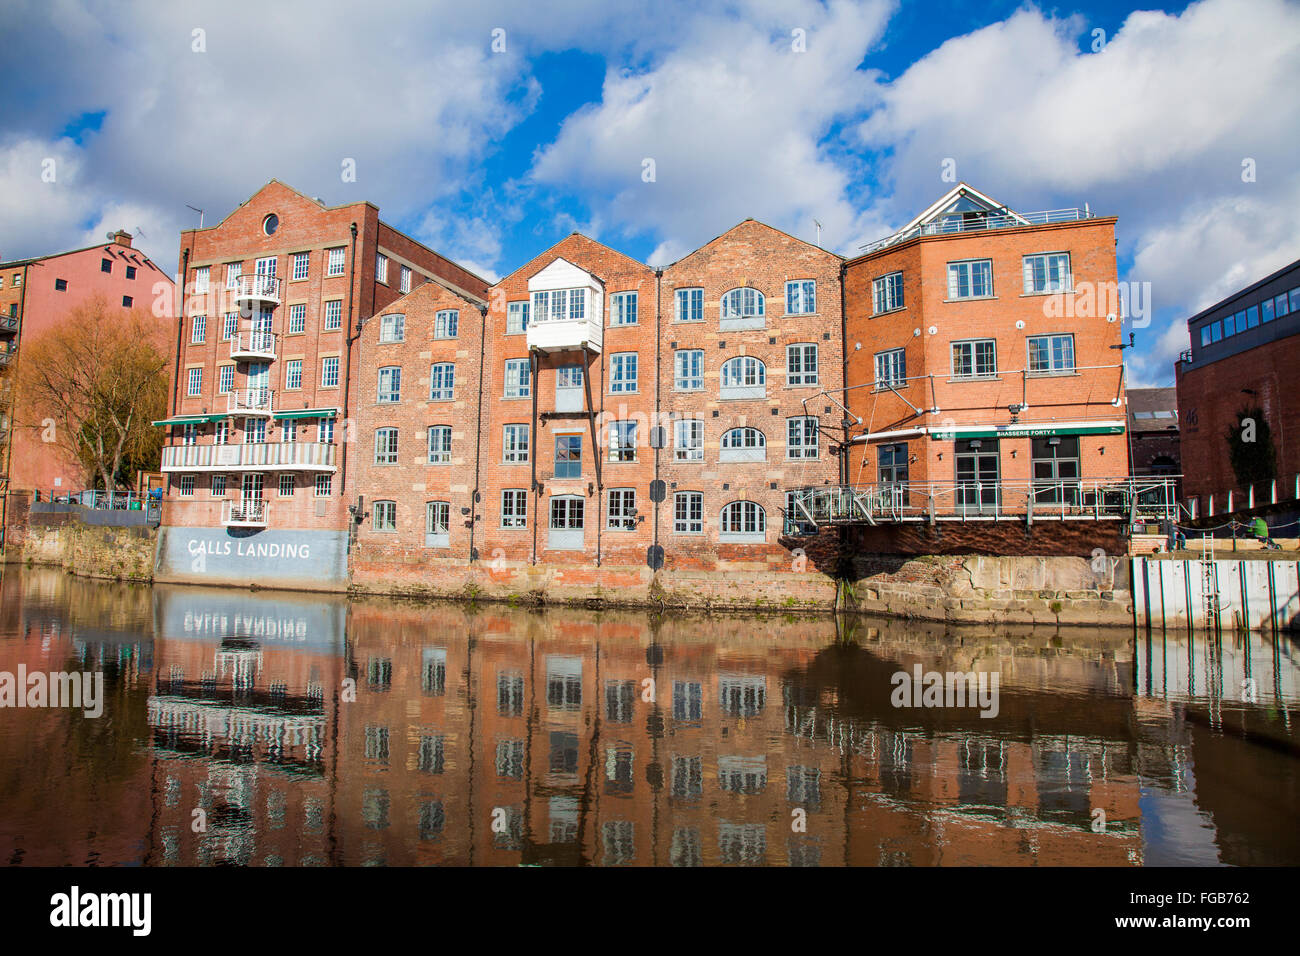 The Calls Landing, on the river Aire at Brewery Wharf at Leeds, Yorkshire Stock Photo